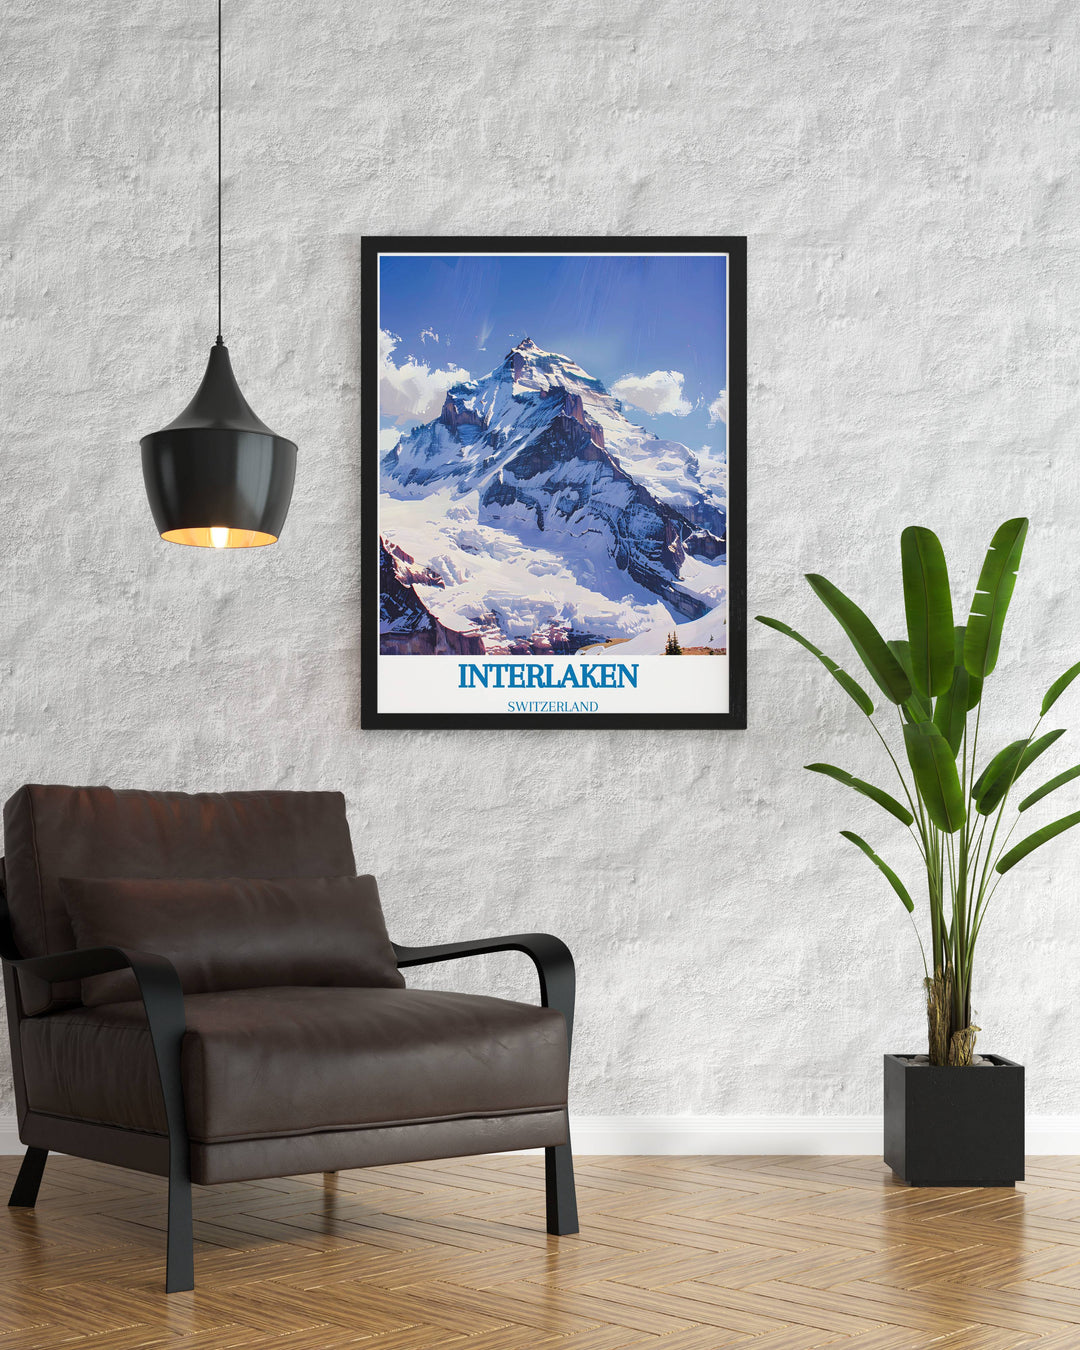 Detailed art print of Jungfraus icy landscapes and frozen lakes, capturing the serene beauty of Swiss winters